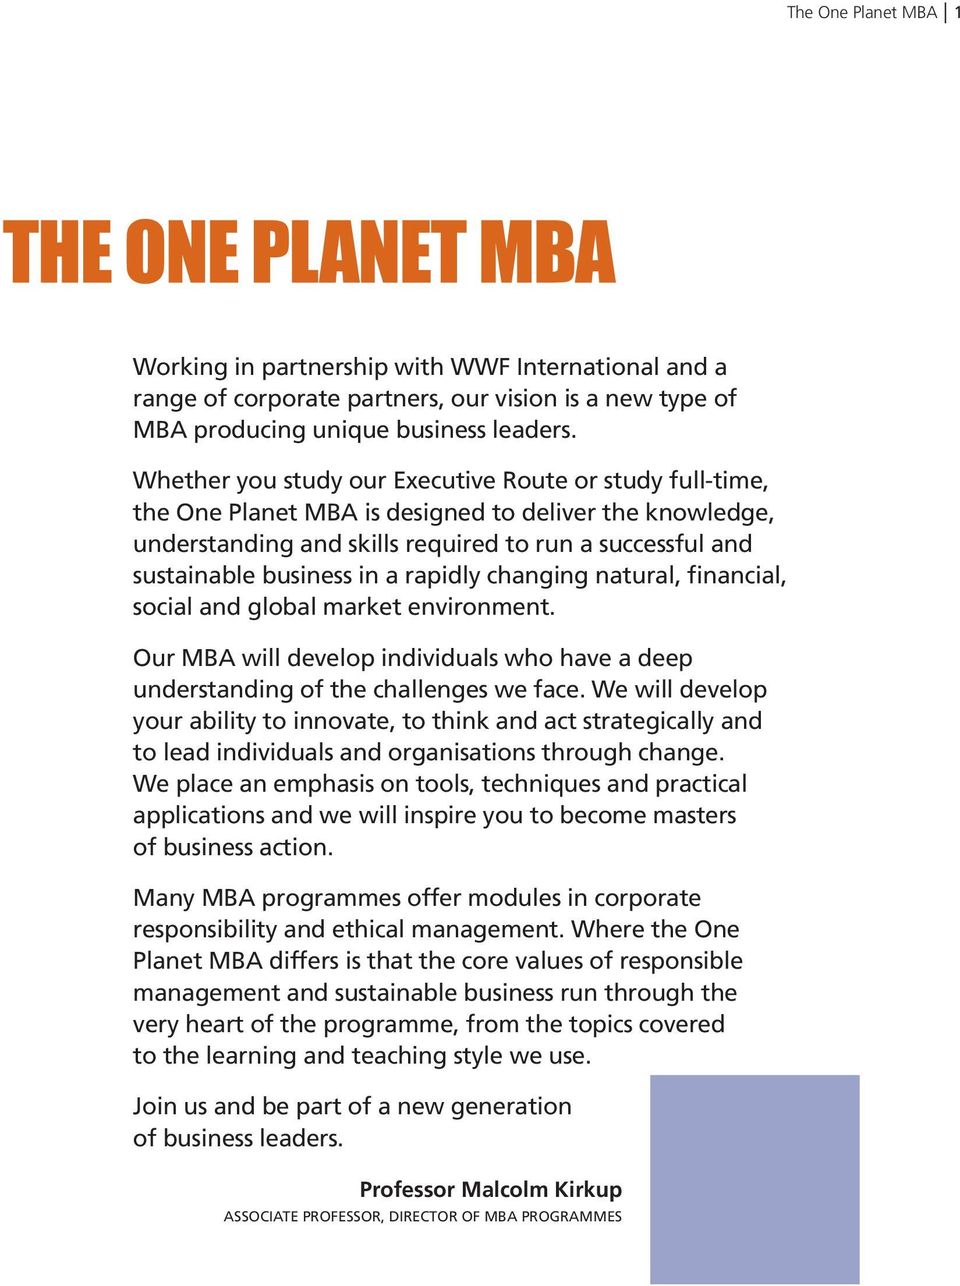 rapidly changing natural, financial, social and global market environment. Our MBA will develop individuals who have a deep understanding of the challenges we face.